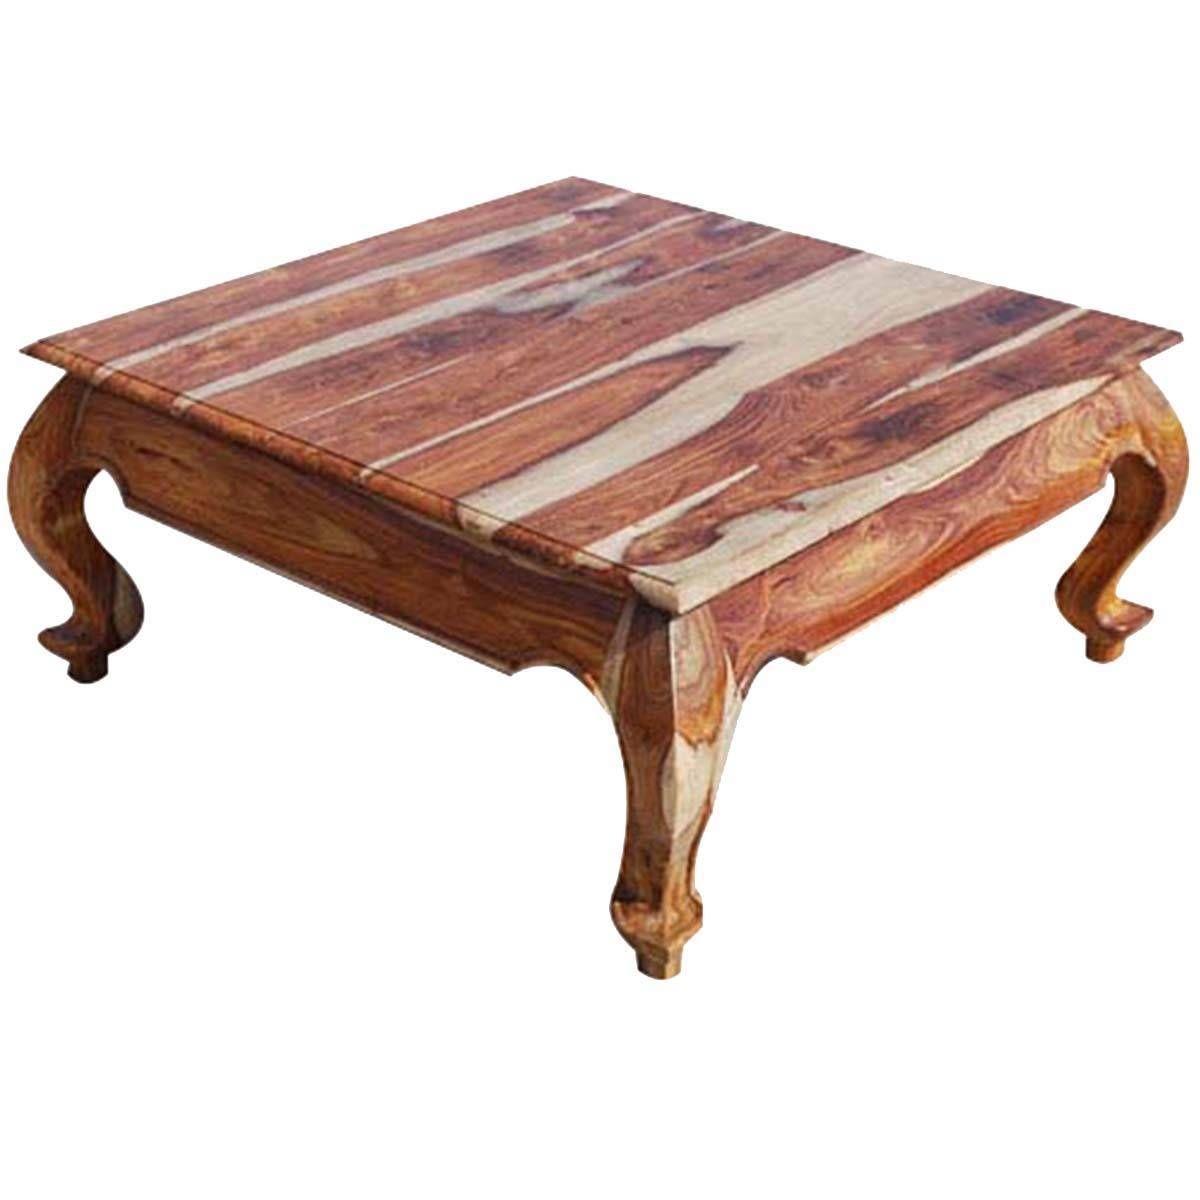 Large Square Solid Wood Opium Coffee Table In Square Wooden Coffee Tables (View 4 of 30)